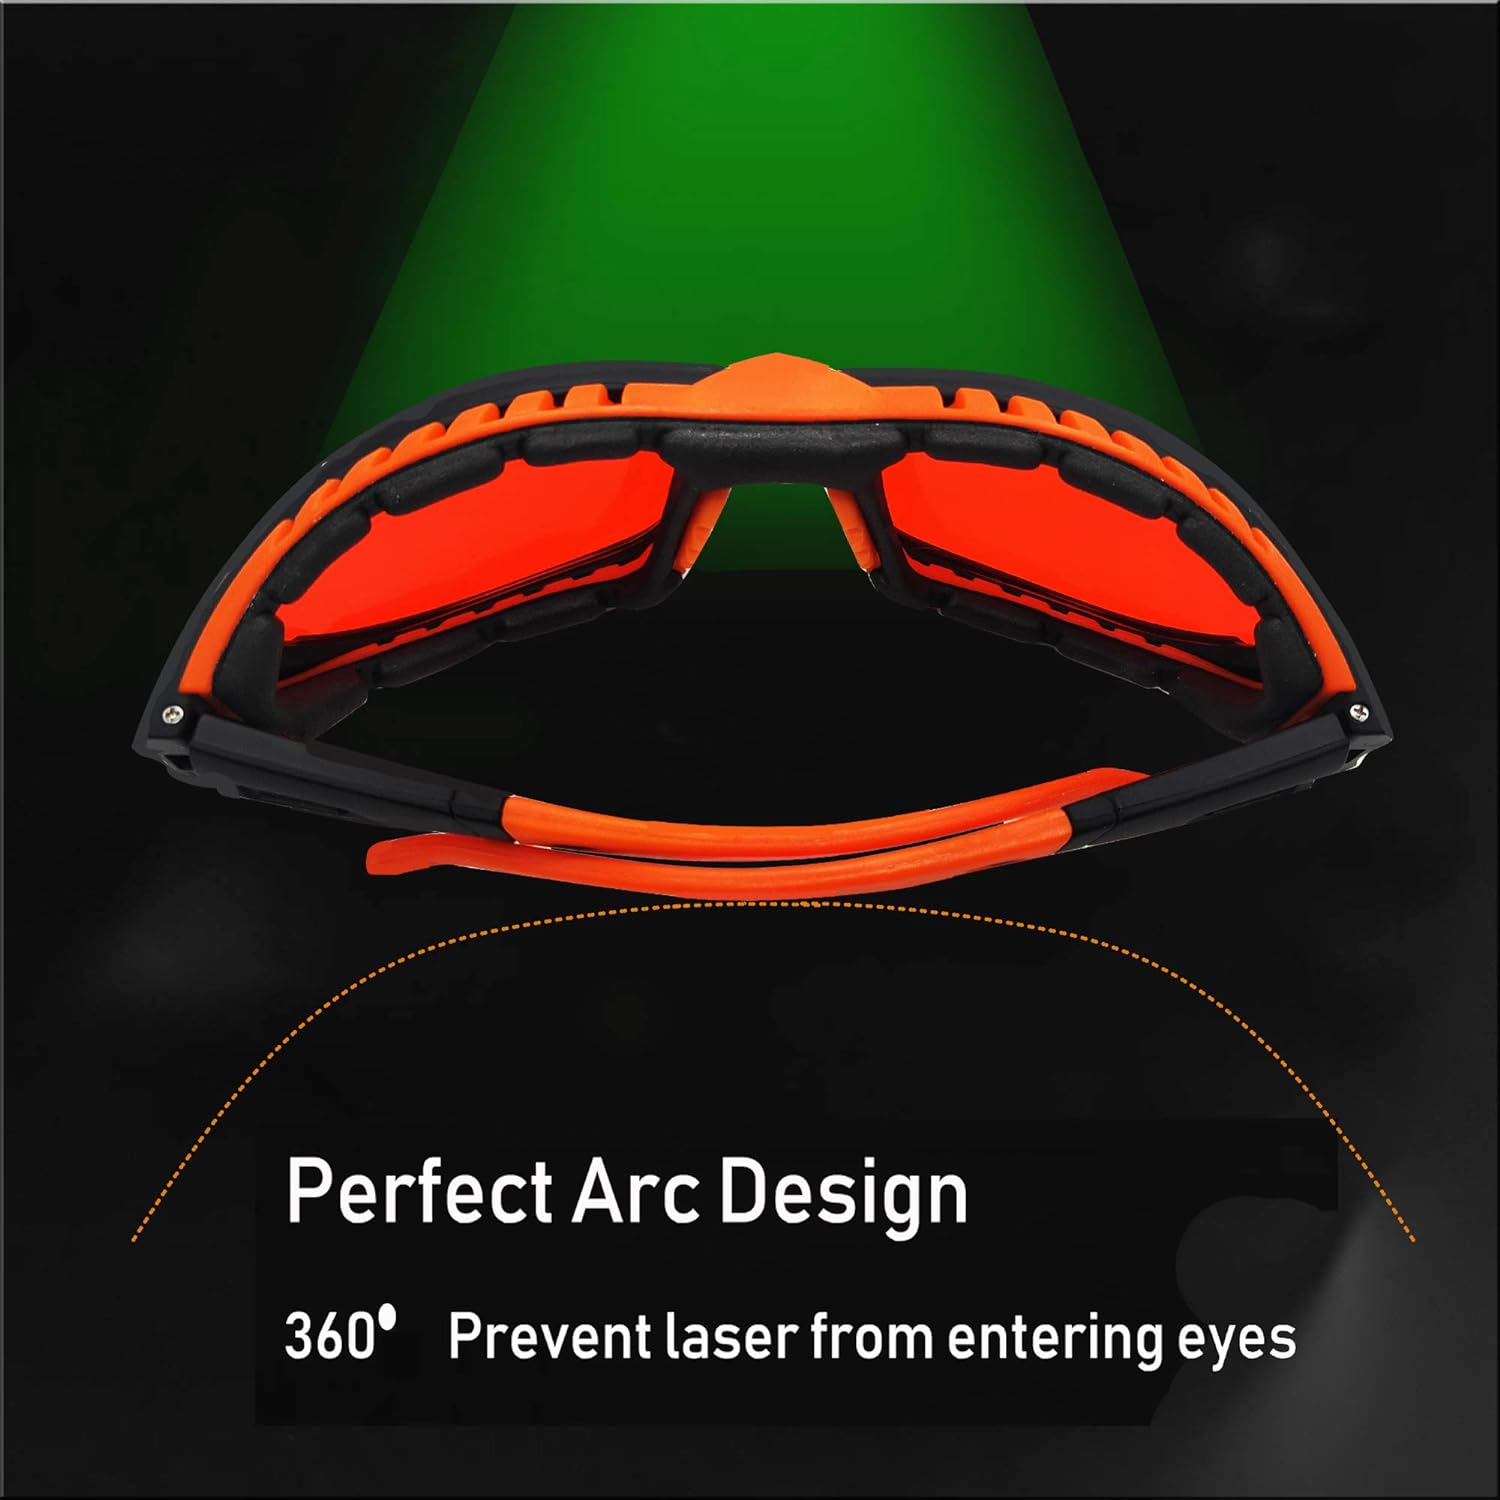 Professional 180nm-540nm OD 6+ Violet / Blue /Green Laser Safety Glasses for 405nm, 445nm, 450nm,473nm, 532nm Laser Lightweight and Fashion Design